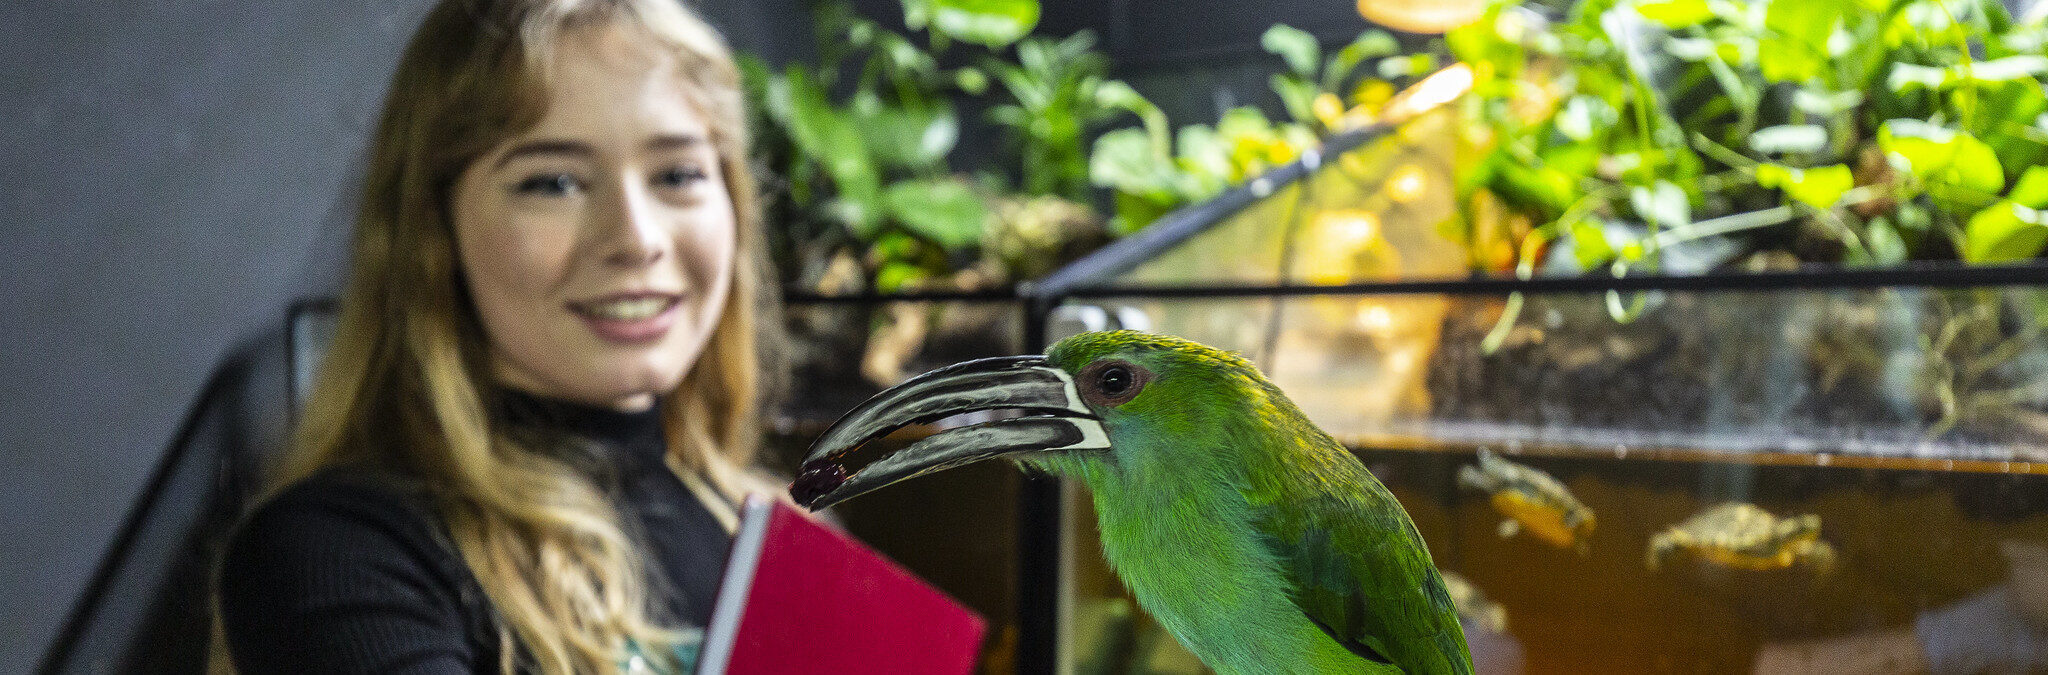 Student and toucanet Animal Sciences Shuttleworth College